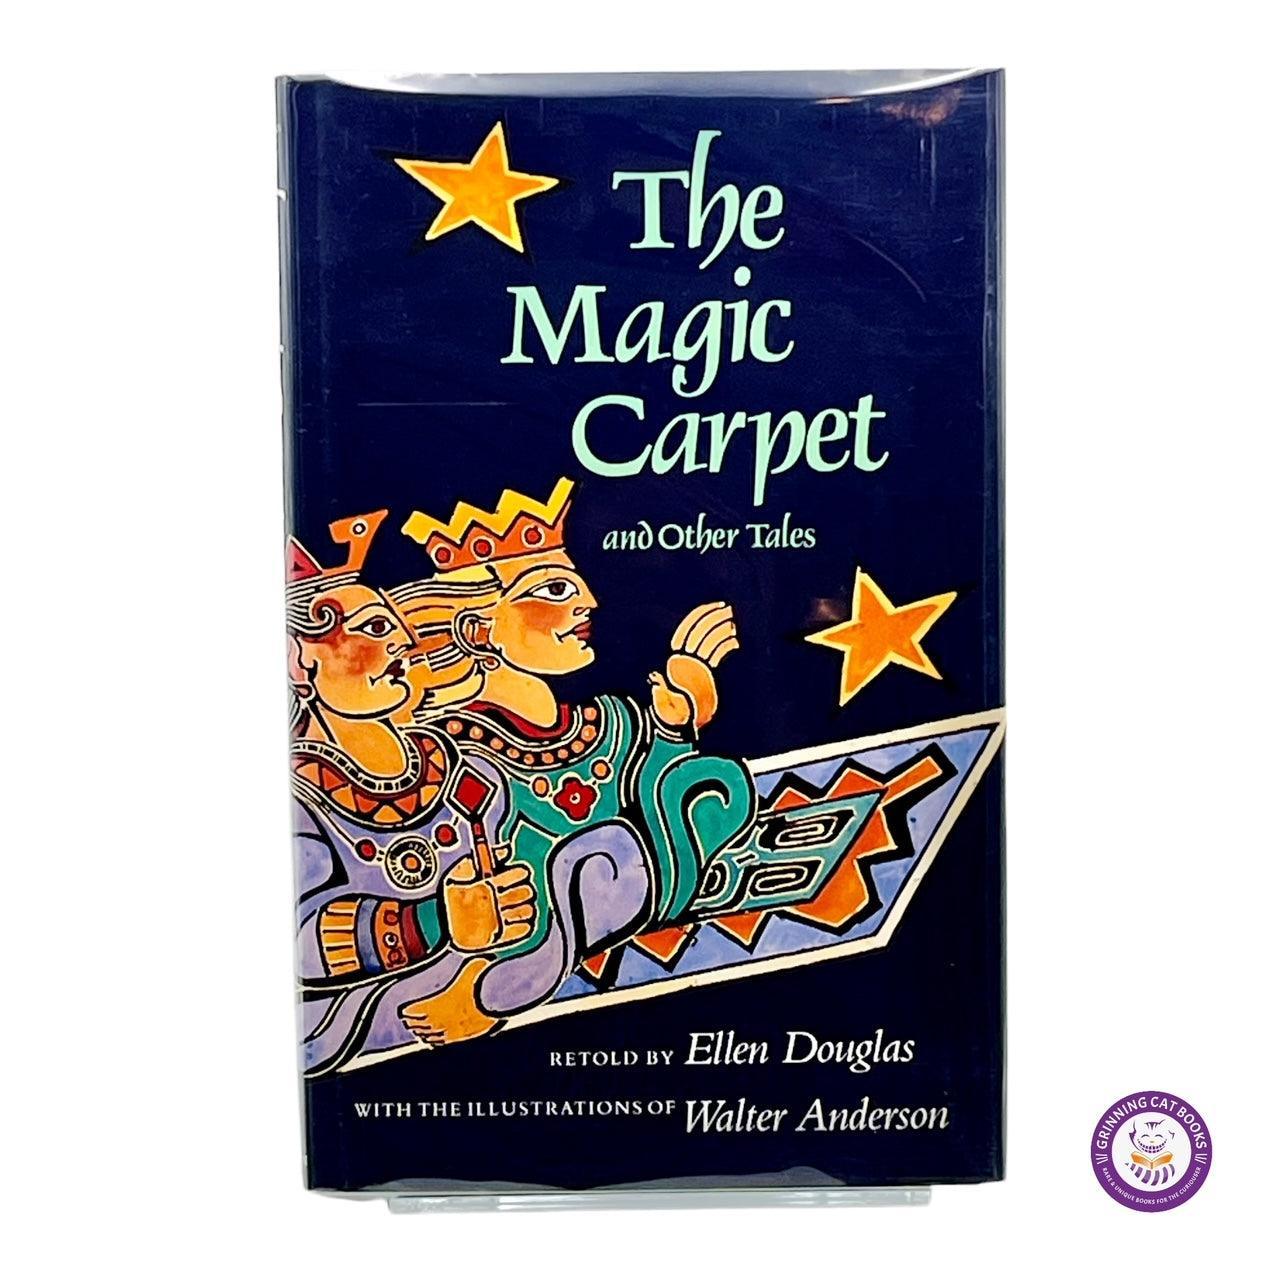 The Magic Carpet and Other Tales (signed) - Grinning Cat Books - CHILDREN'S LITERATURE - FAIRY TALES, SIGNED